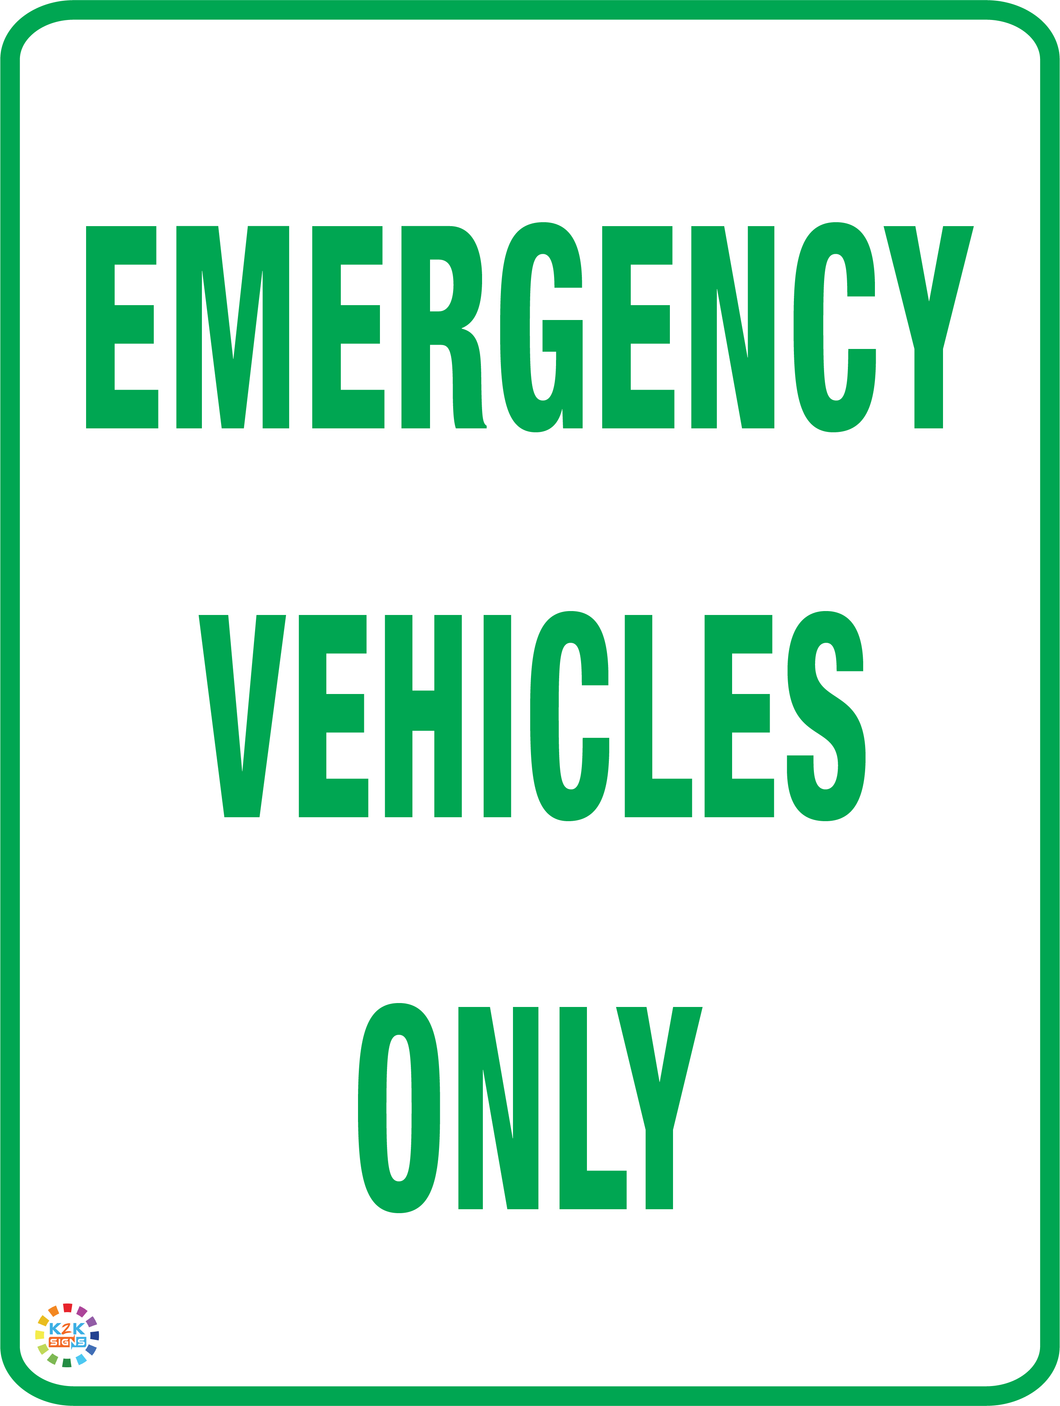 Emergency Vehicles Only Sign